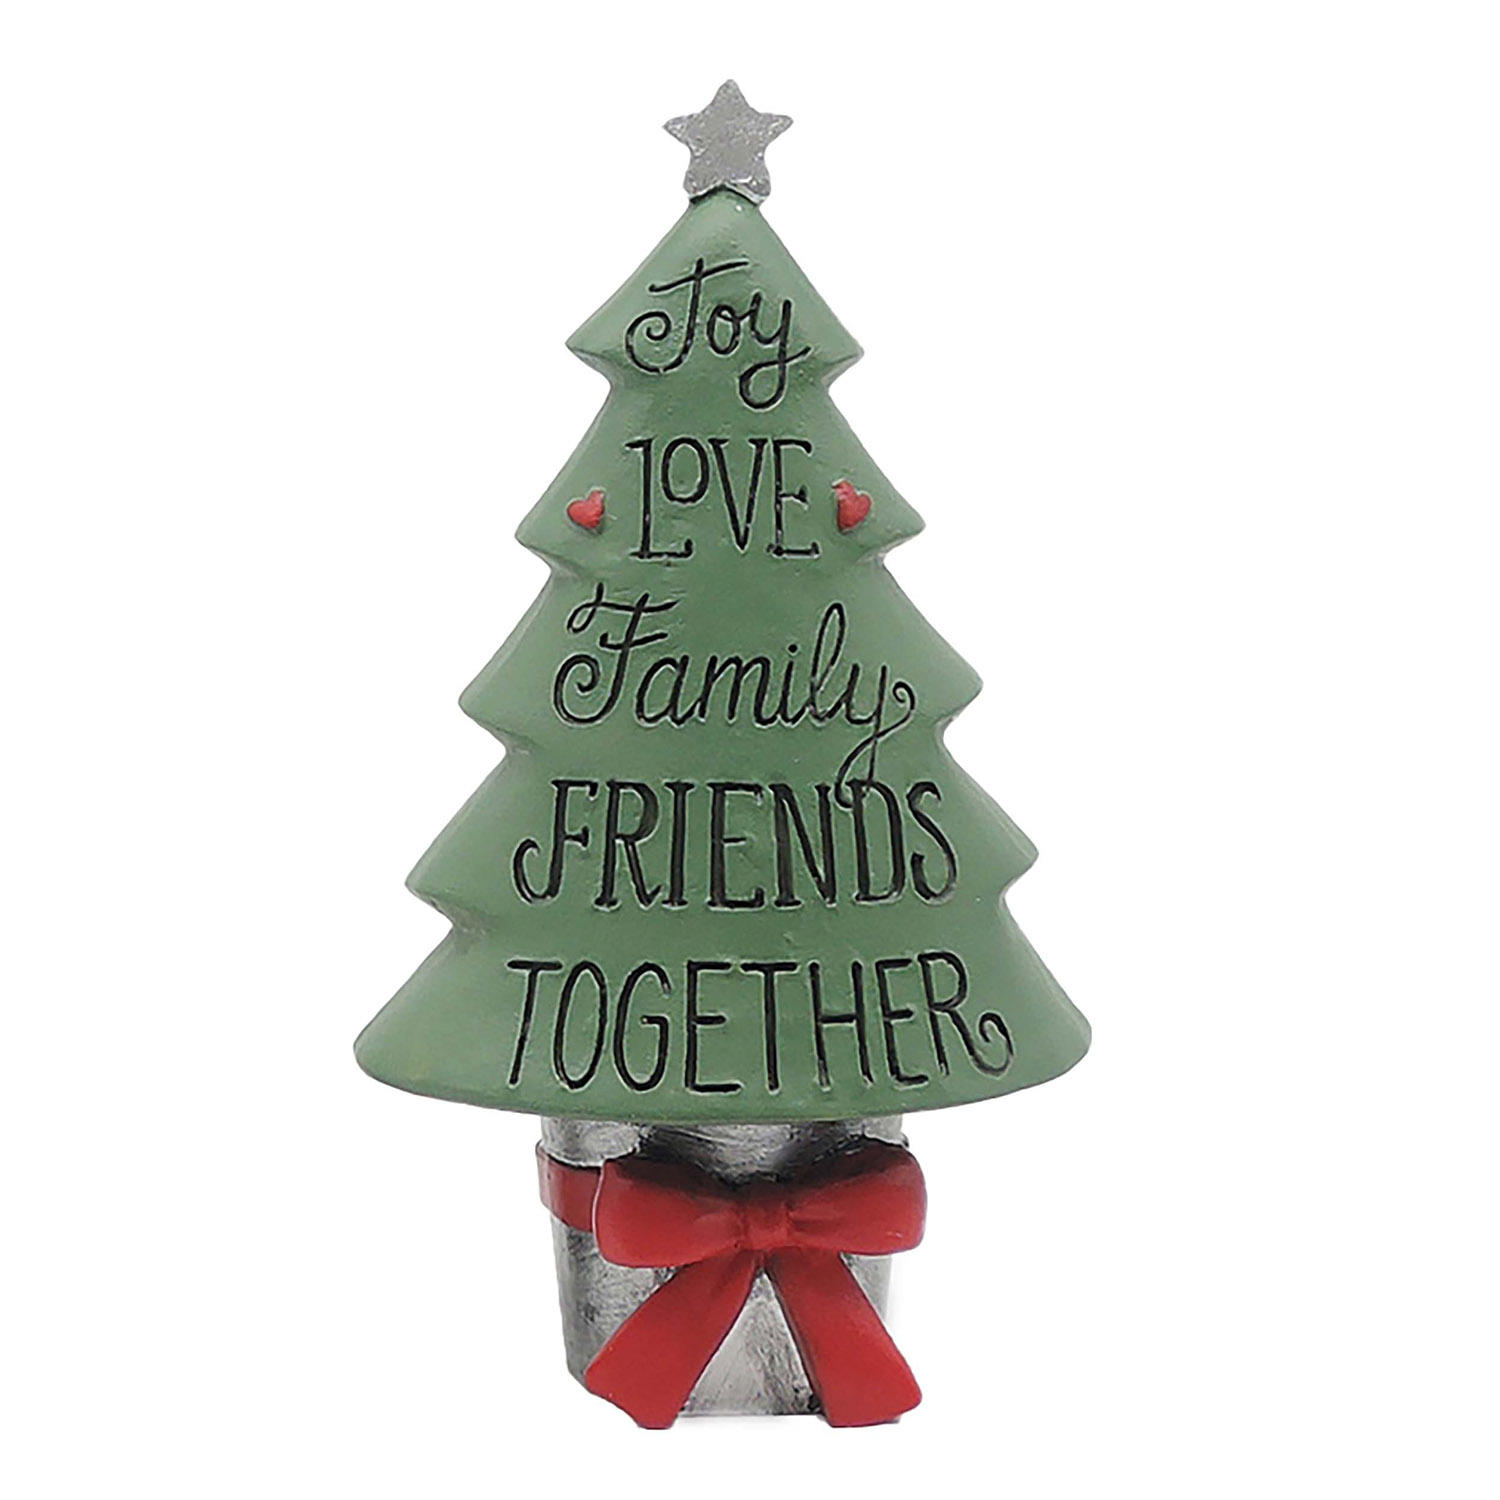 Hot Sale 4.72 Inch Tall Resin Family & Friends Together Christmas Tree Tabletop Decorative Christmas Figurine As Xmas Gifts228-13484